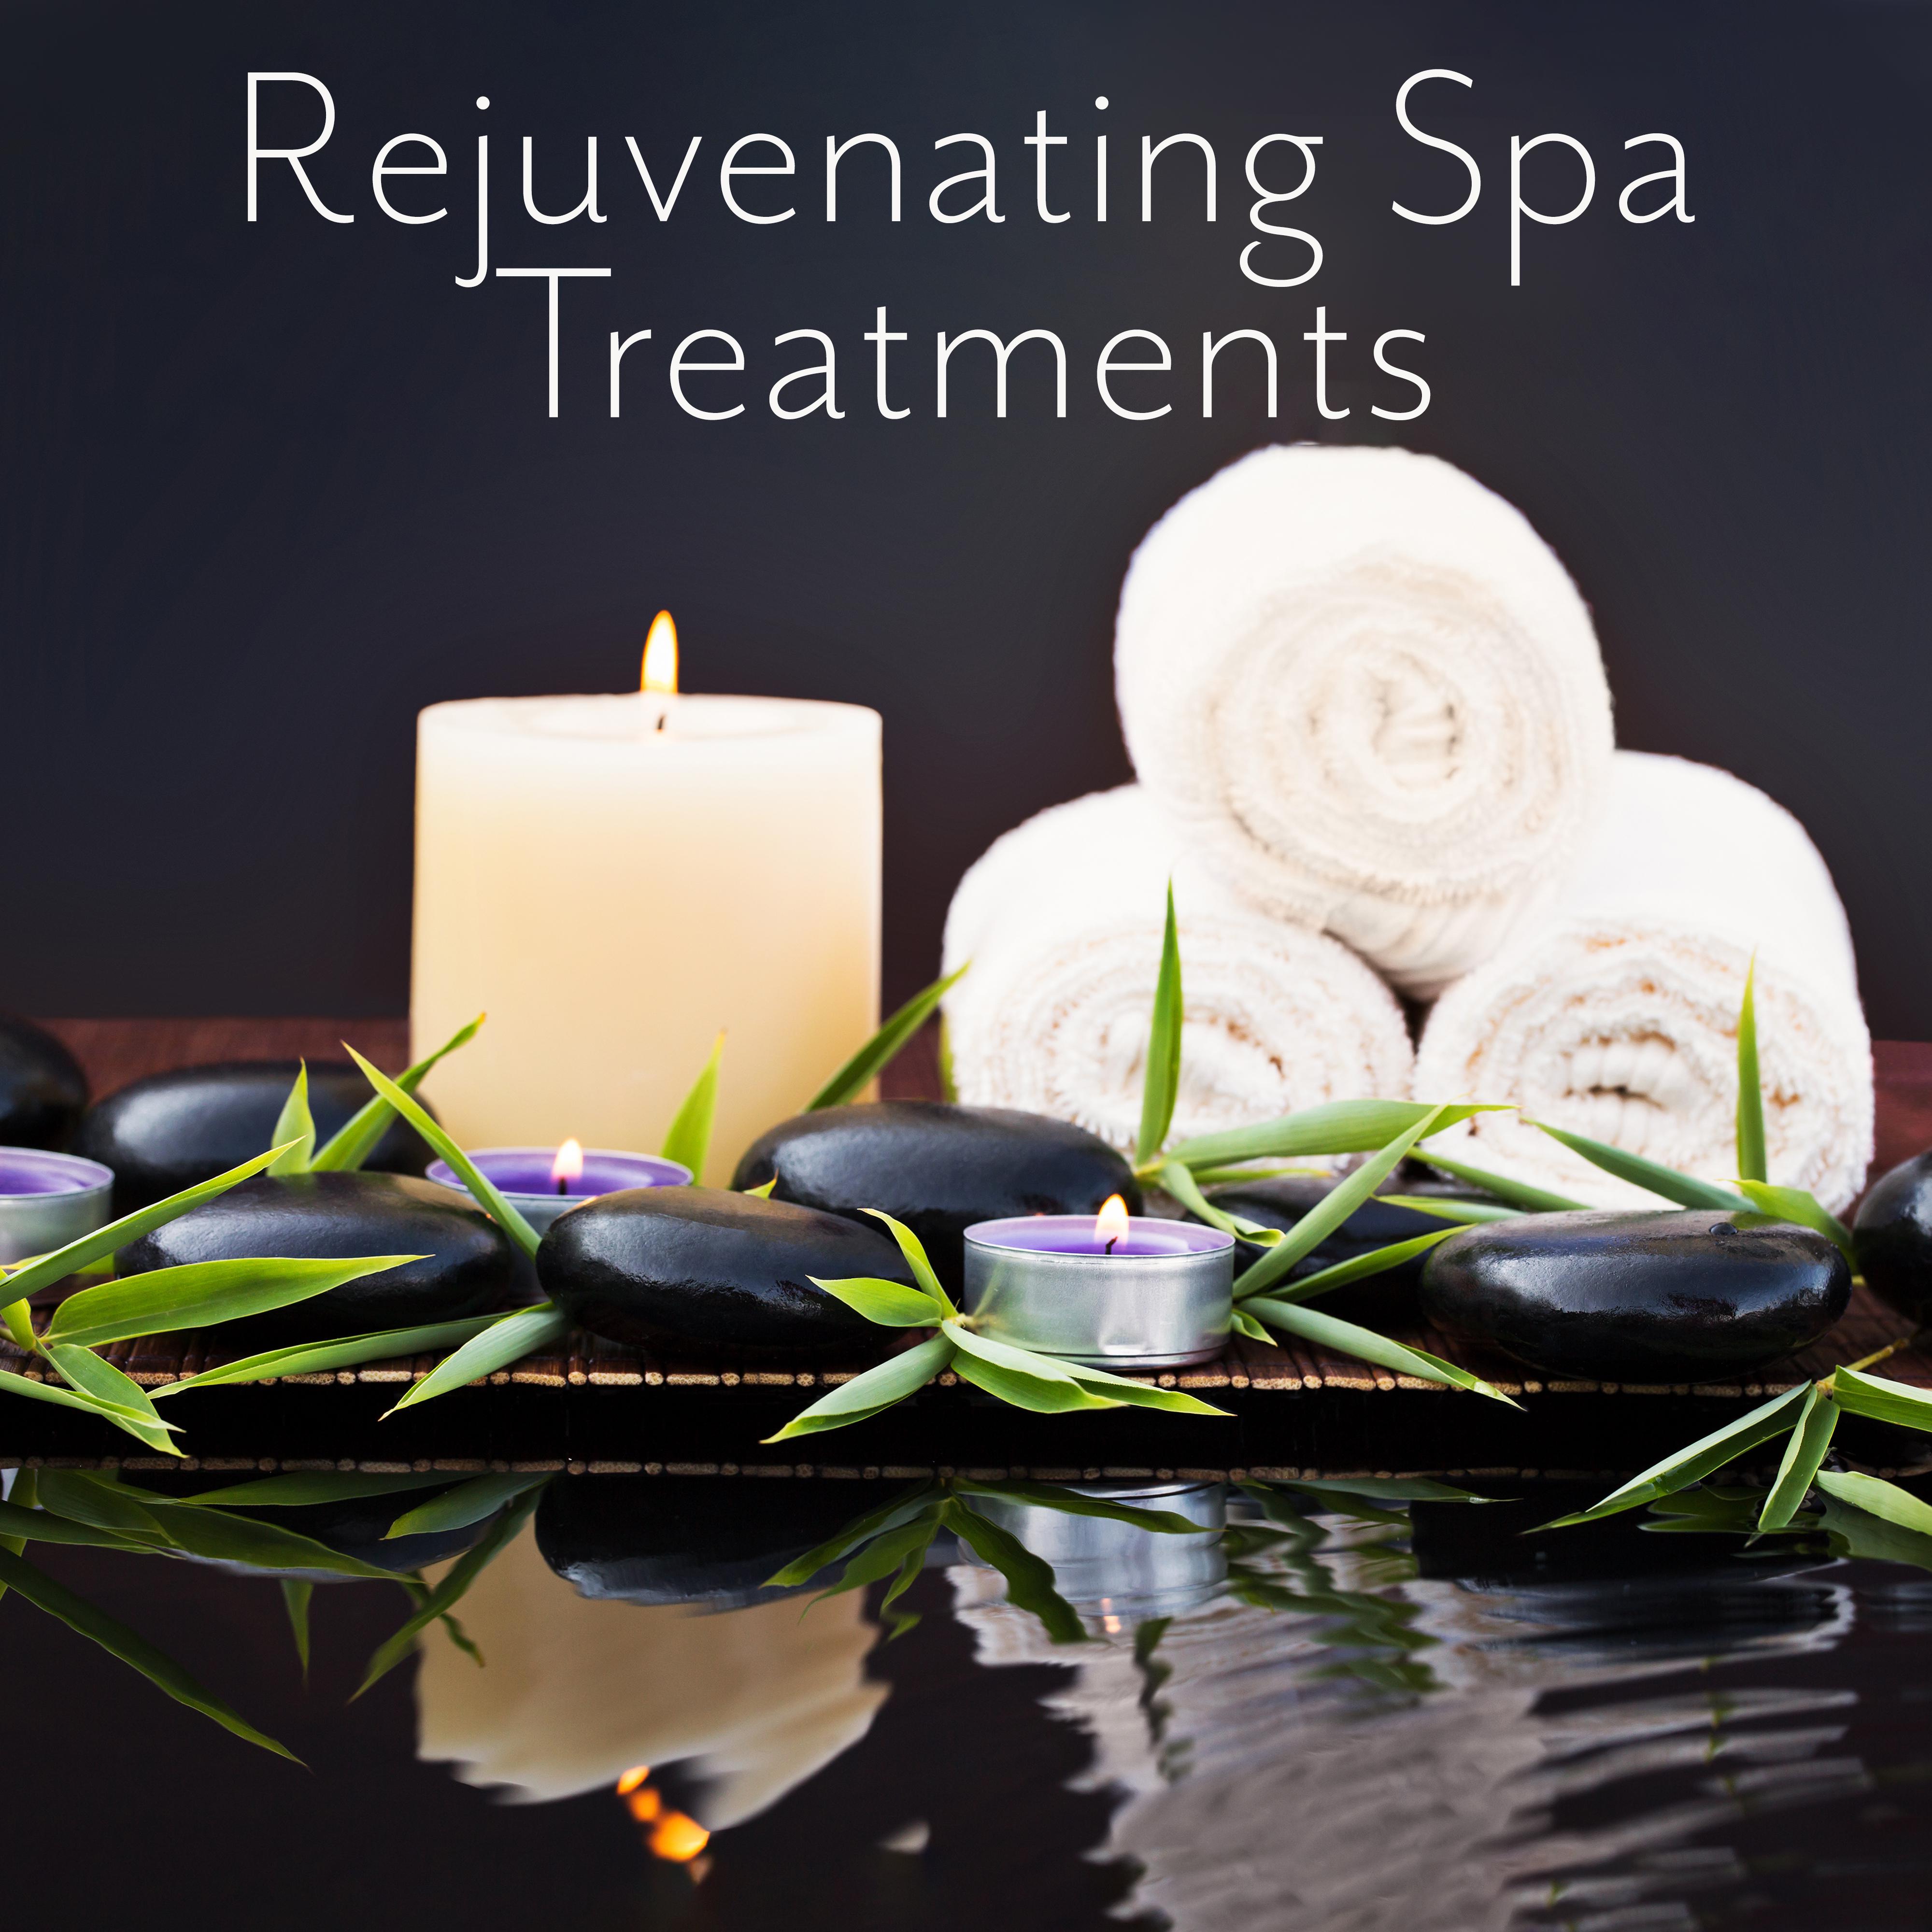 Rejuvenating Spa Treatments: 15 Ambient Tracks for Your Beauty, Relaxation and Health